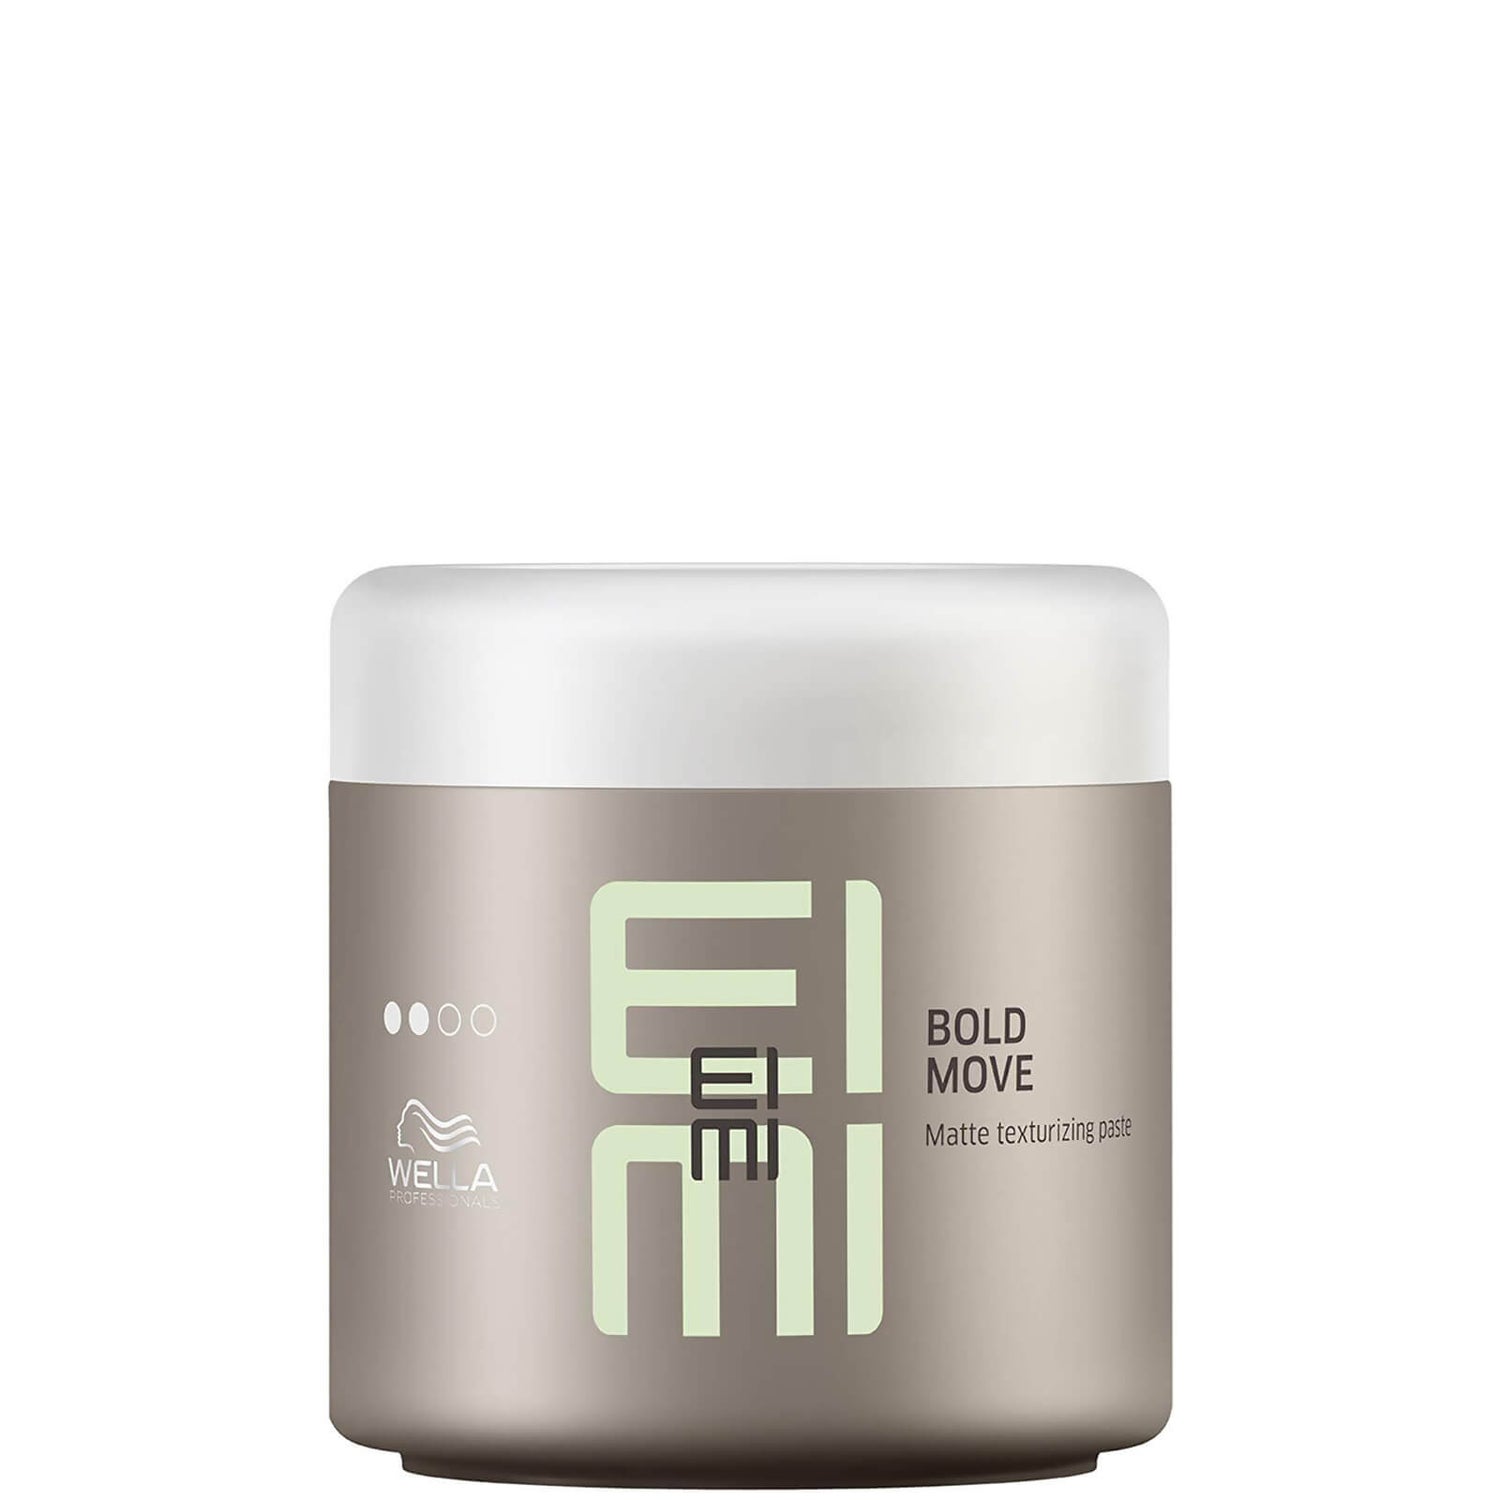 Wella Professionals Dry Bold Move Matte Styling Paste 150ml